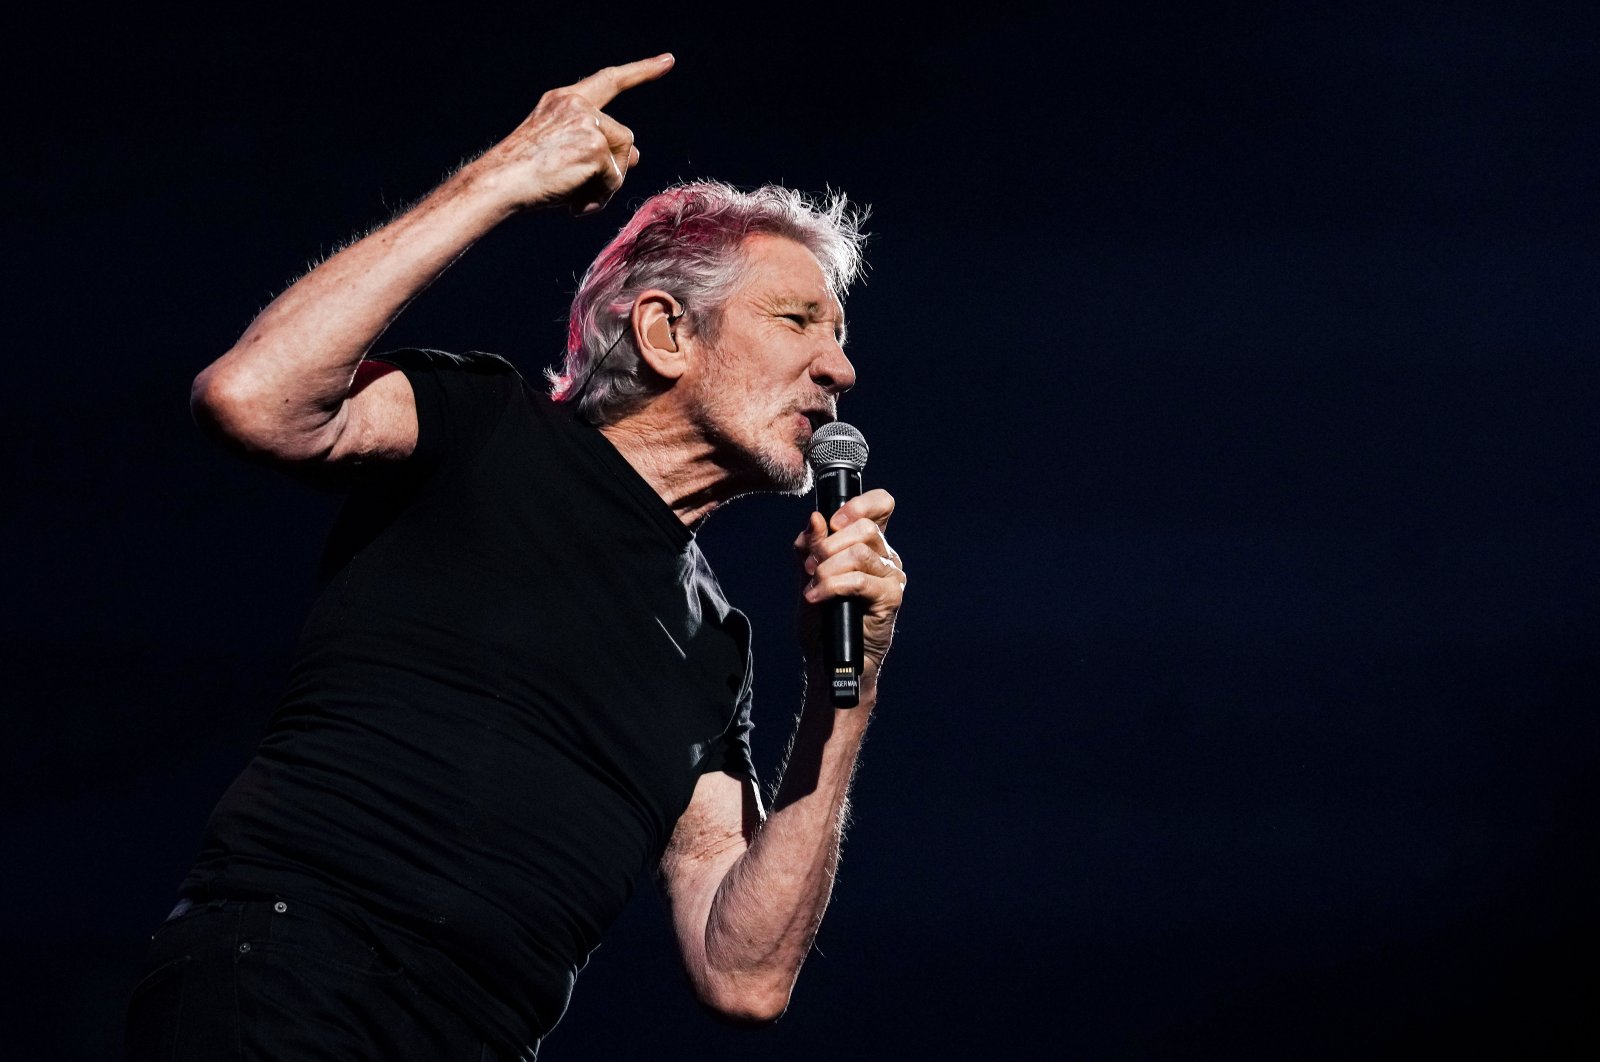 British musician Roger Waters performs a concert in the framework of his European tour &quot;This Is Not A Drill&quot; at Palau Sant Jordi in Barcelona, Spain, March 21, 2023. (EPA Photo)